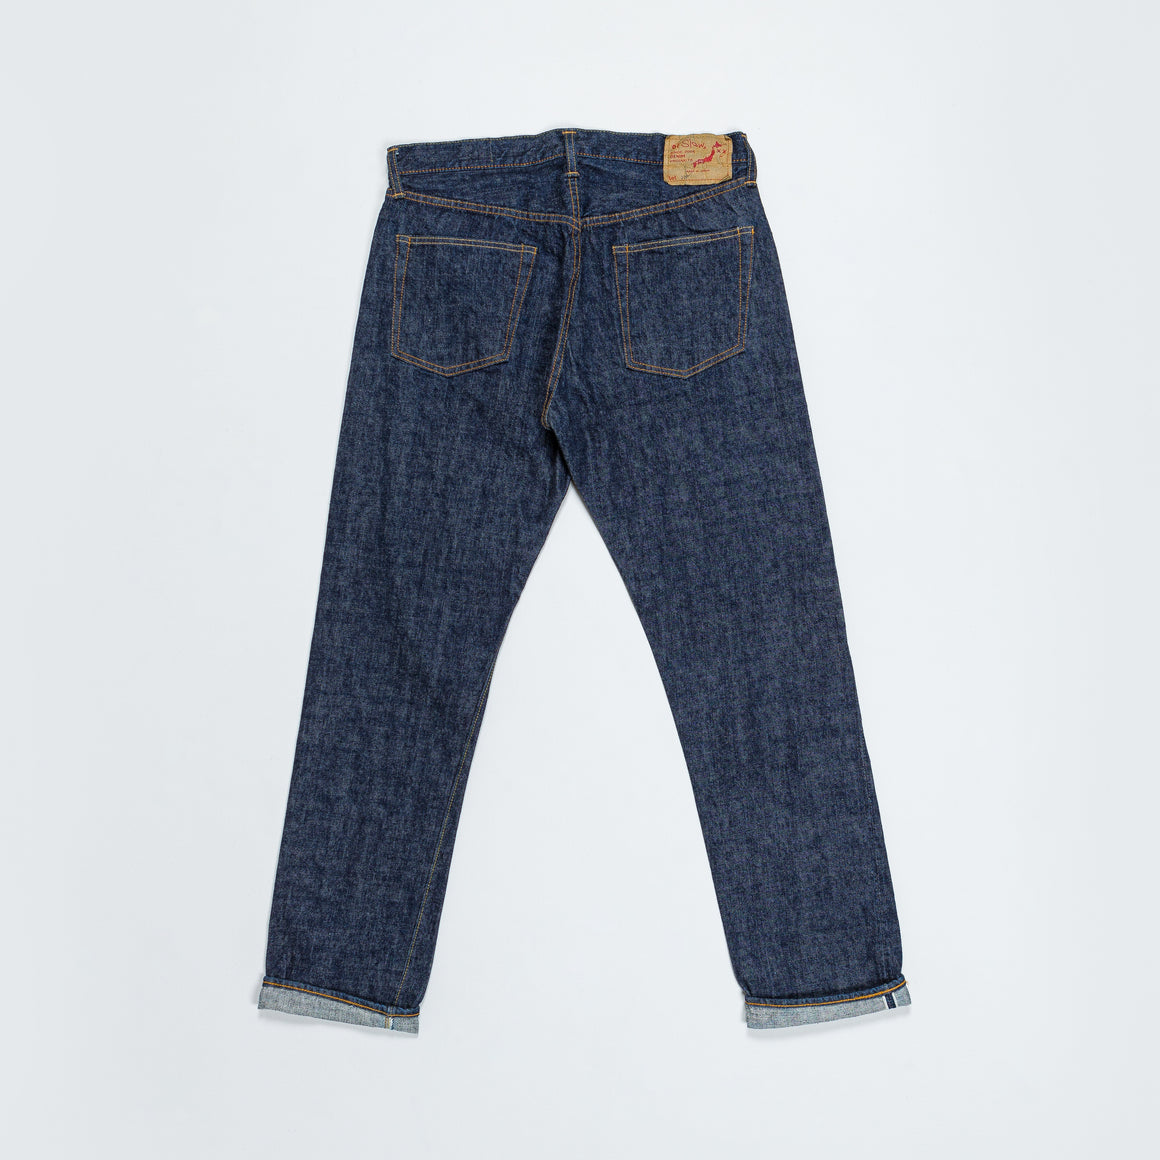 orSlow - 107 Slim Fit Jean - One Wash - UP THERE